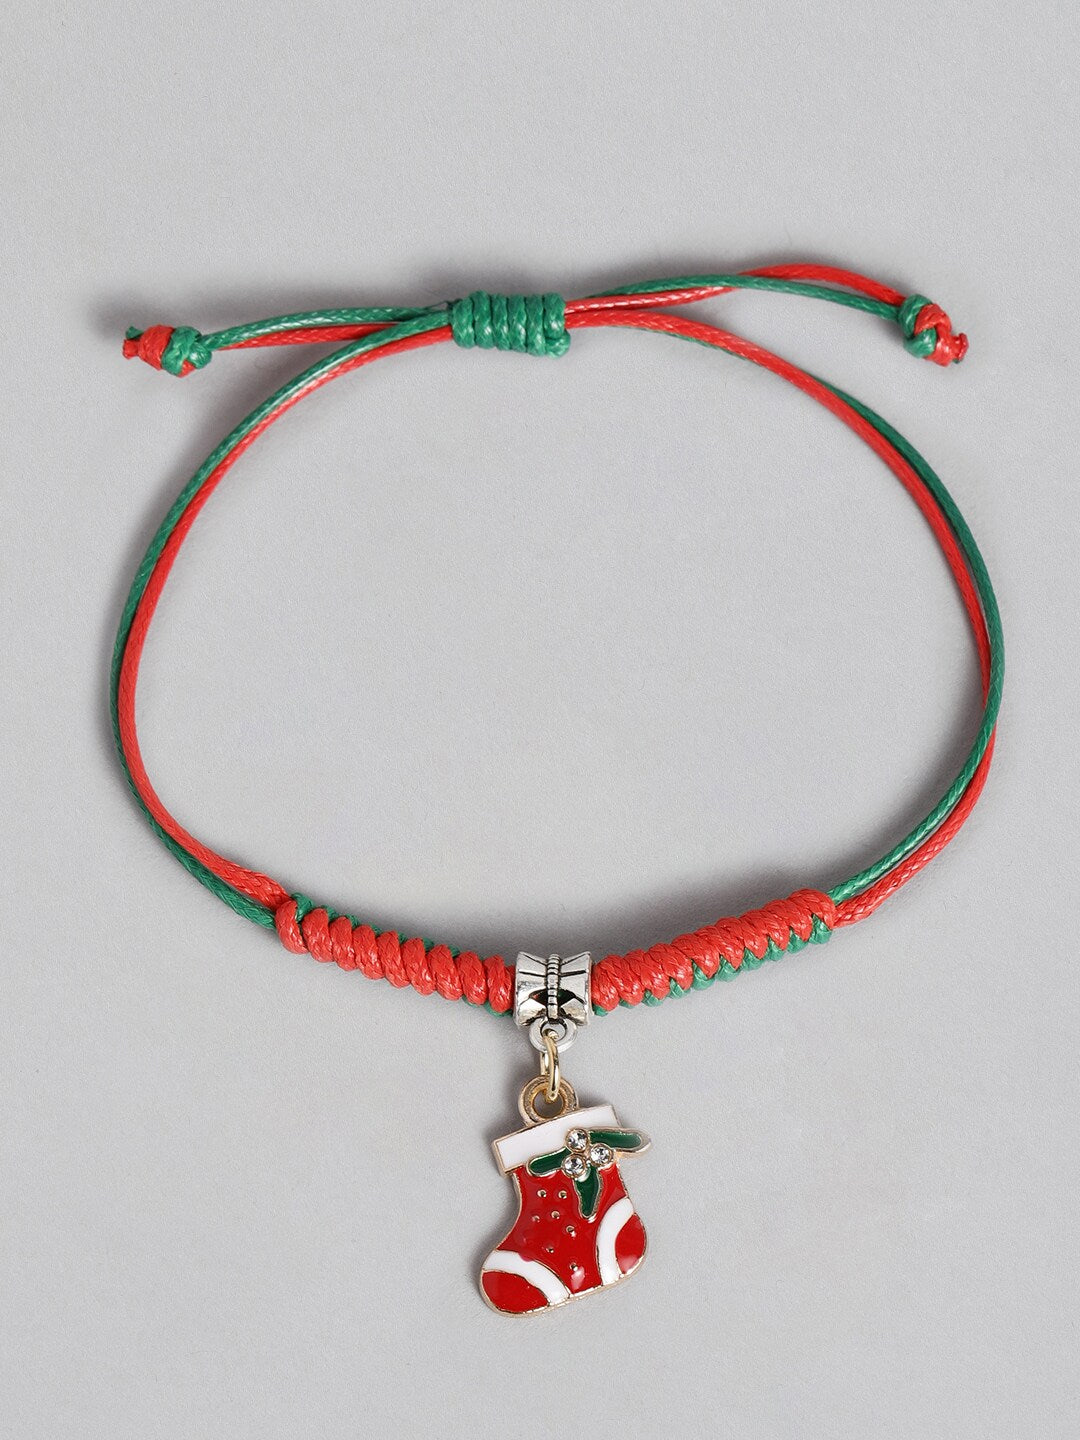 EL REGALO Boys Set of 3 Red & Green Handcrafted Christmas Charm Bracelet - for Kids-Boys
Style ID: 16186536